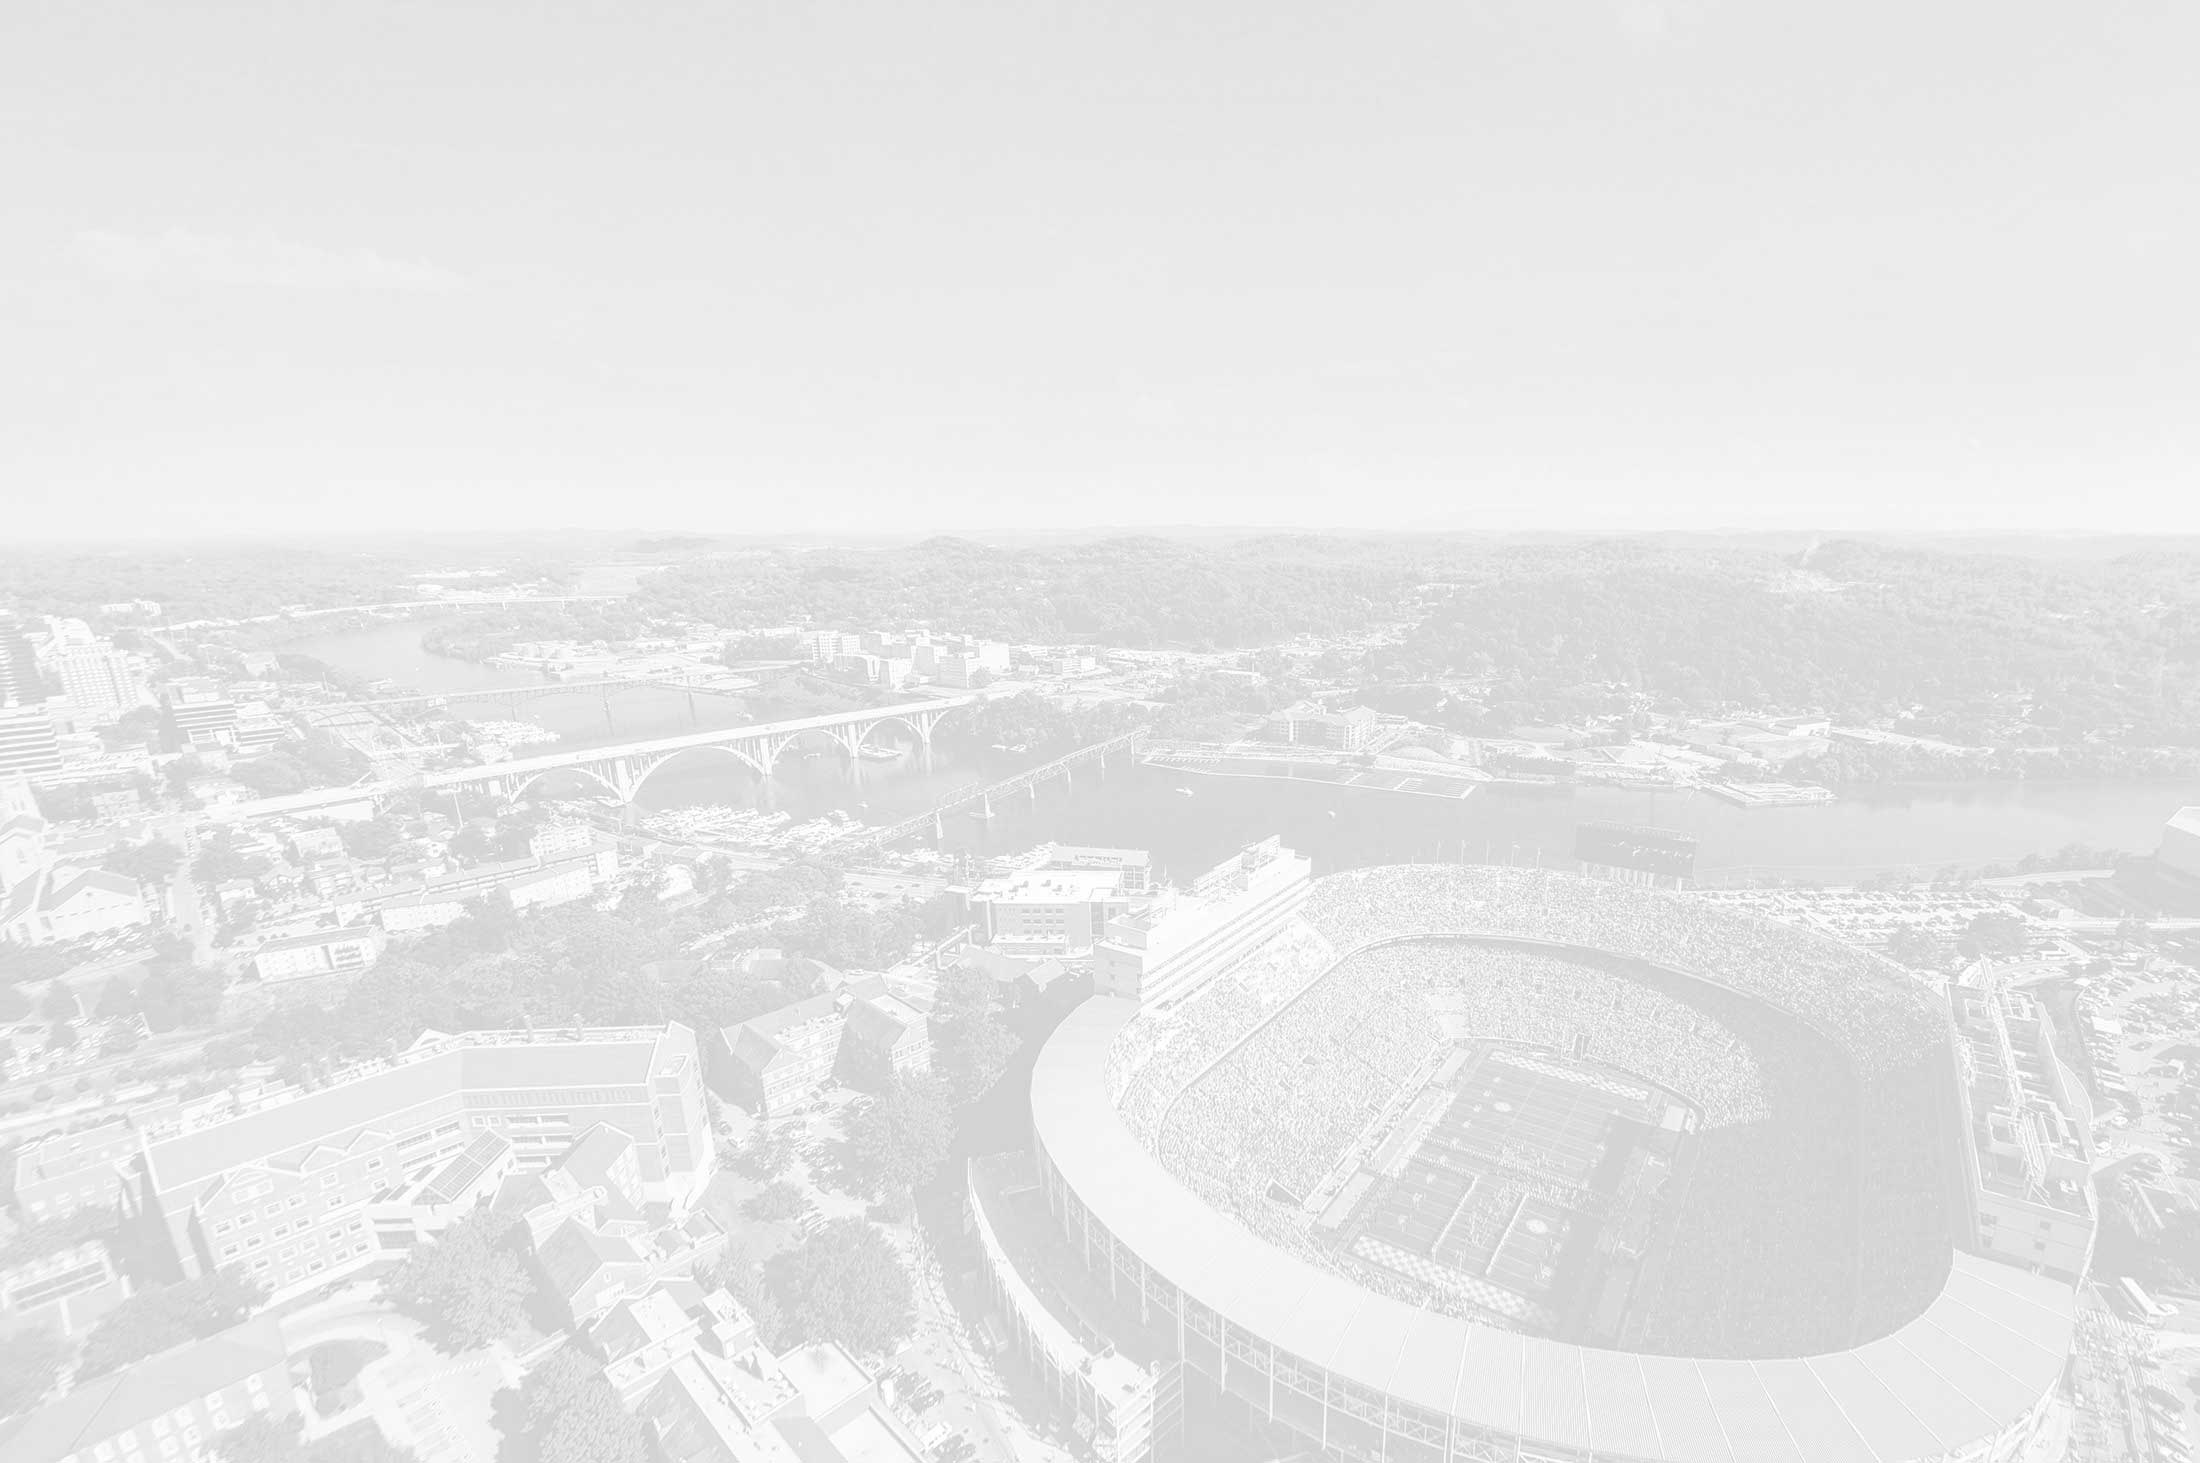 University of Tennessee aerial view.